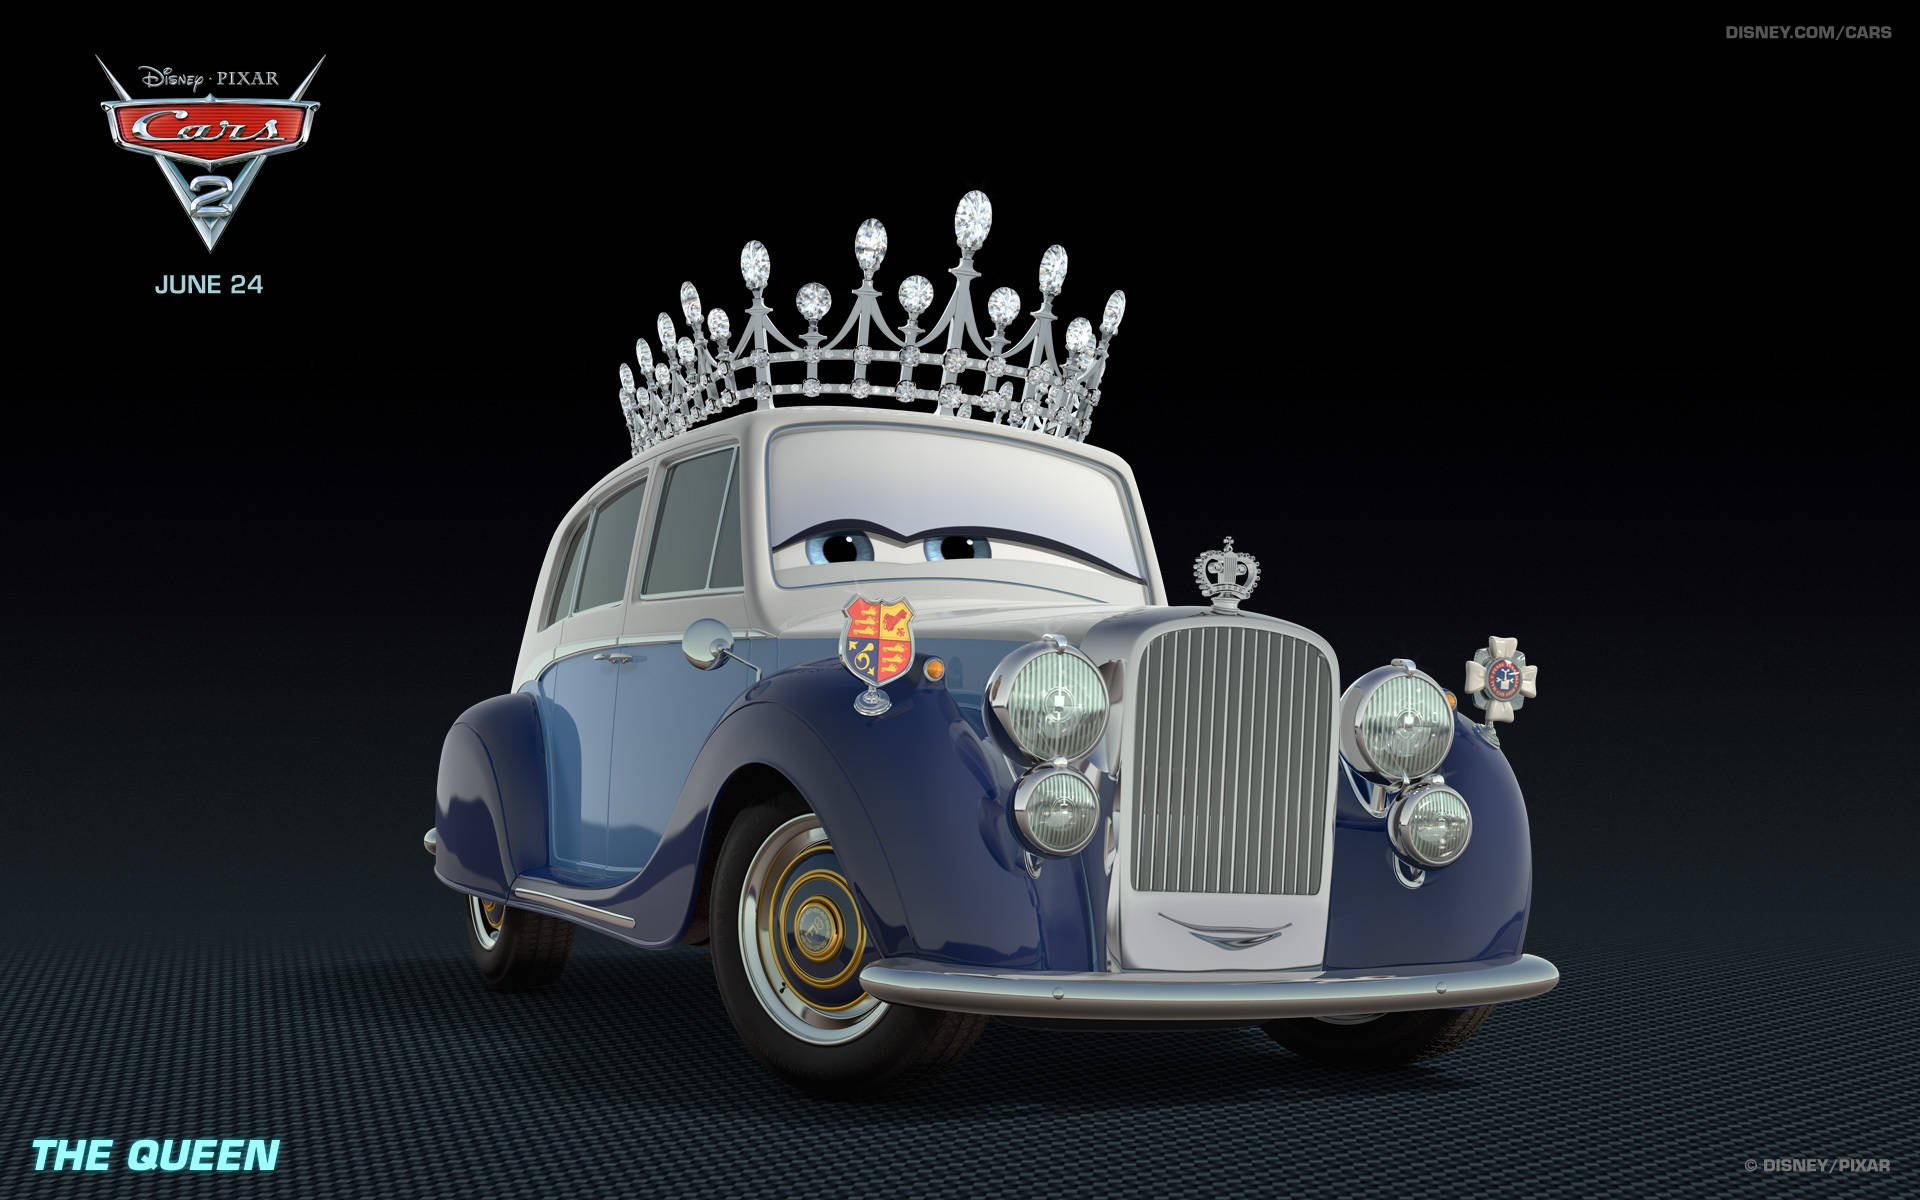 The Queen From Disney Pixar's Cars 2 Background